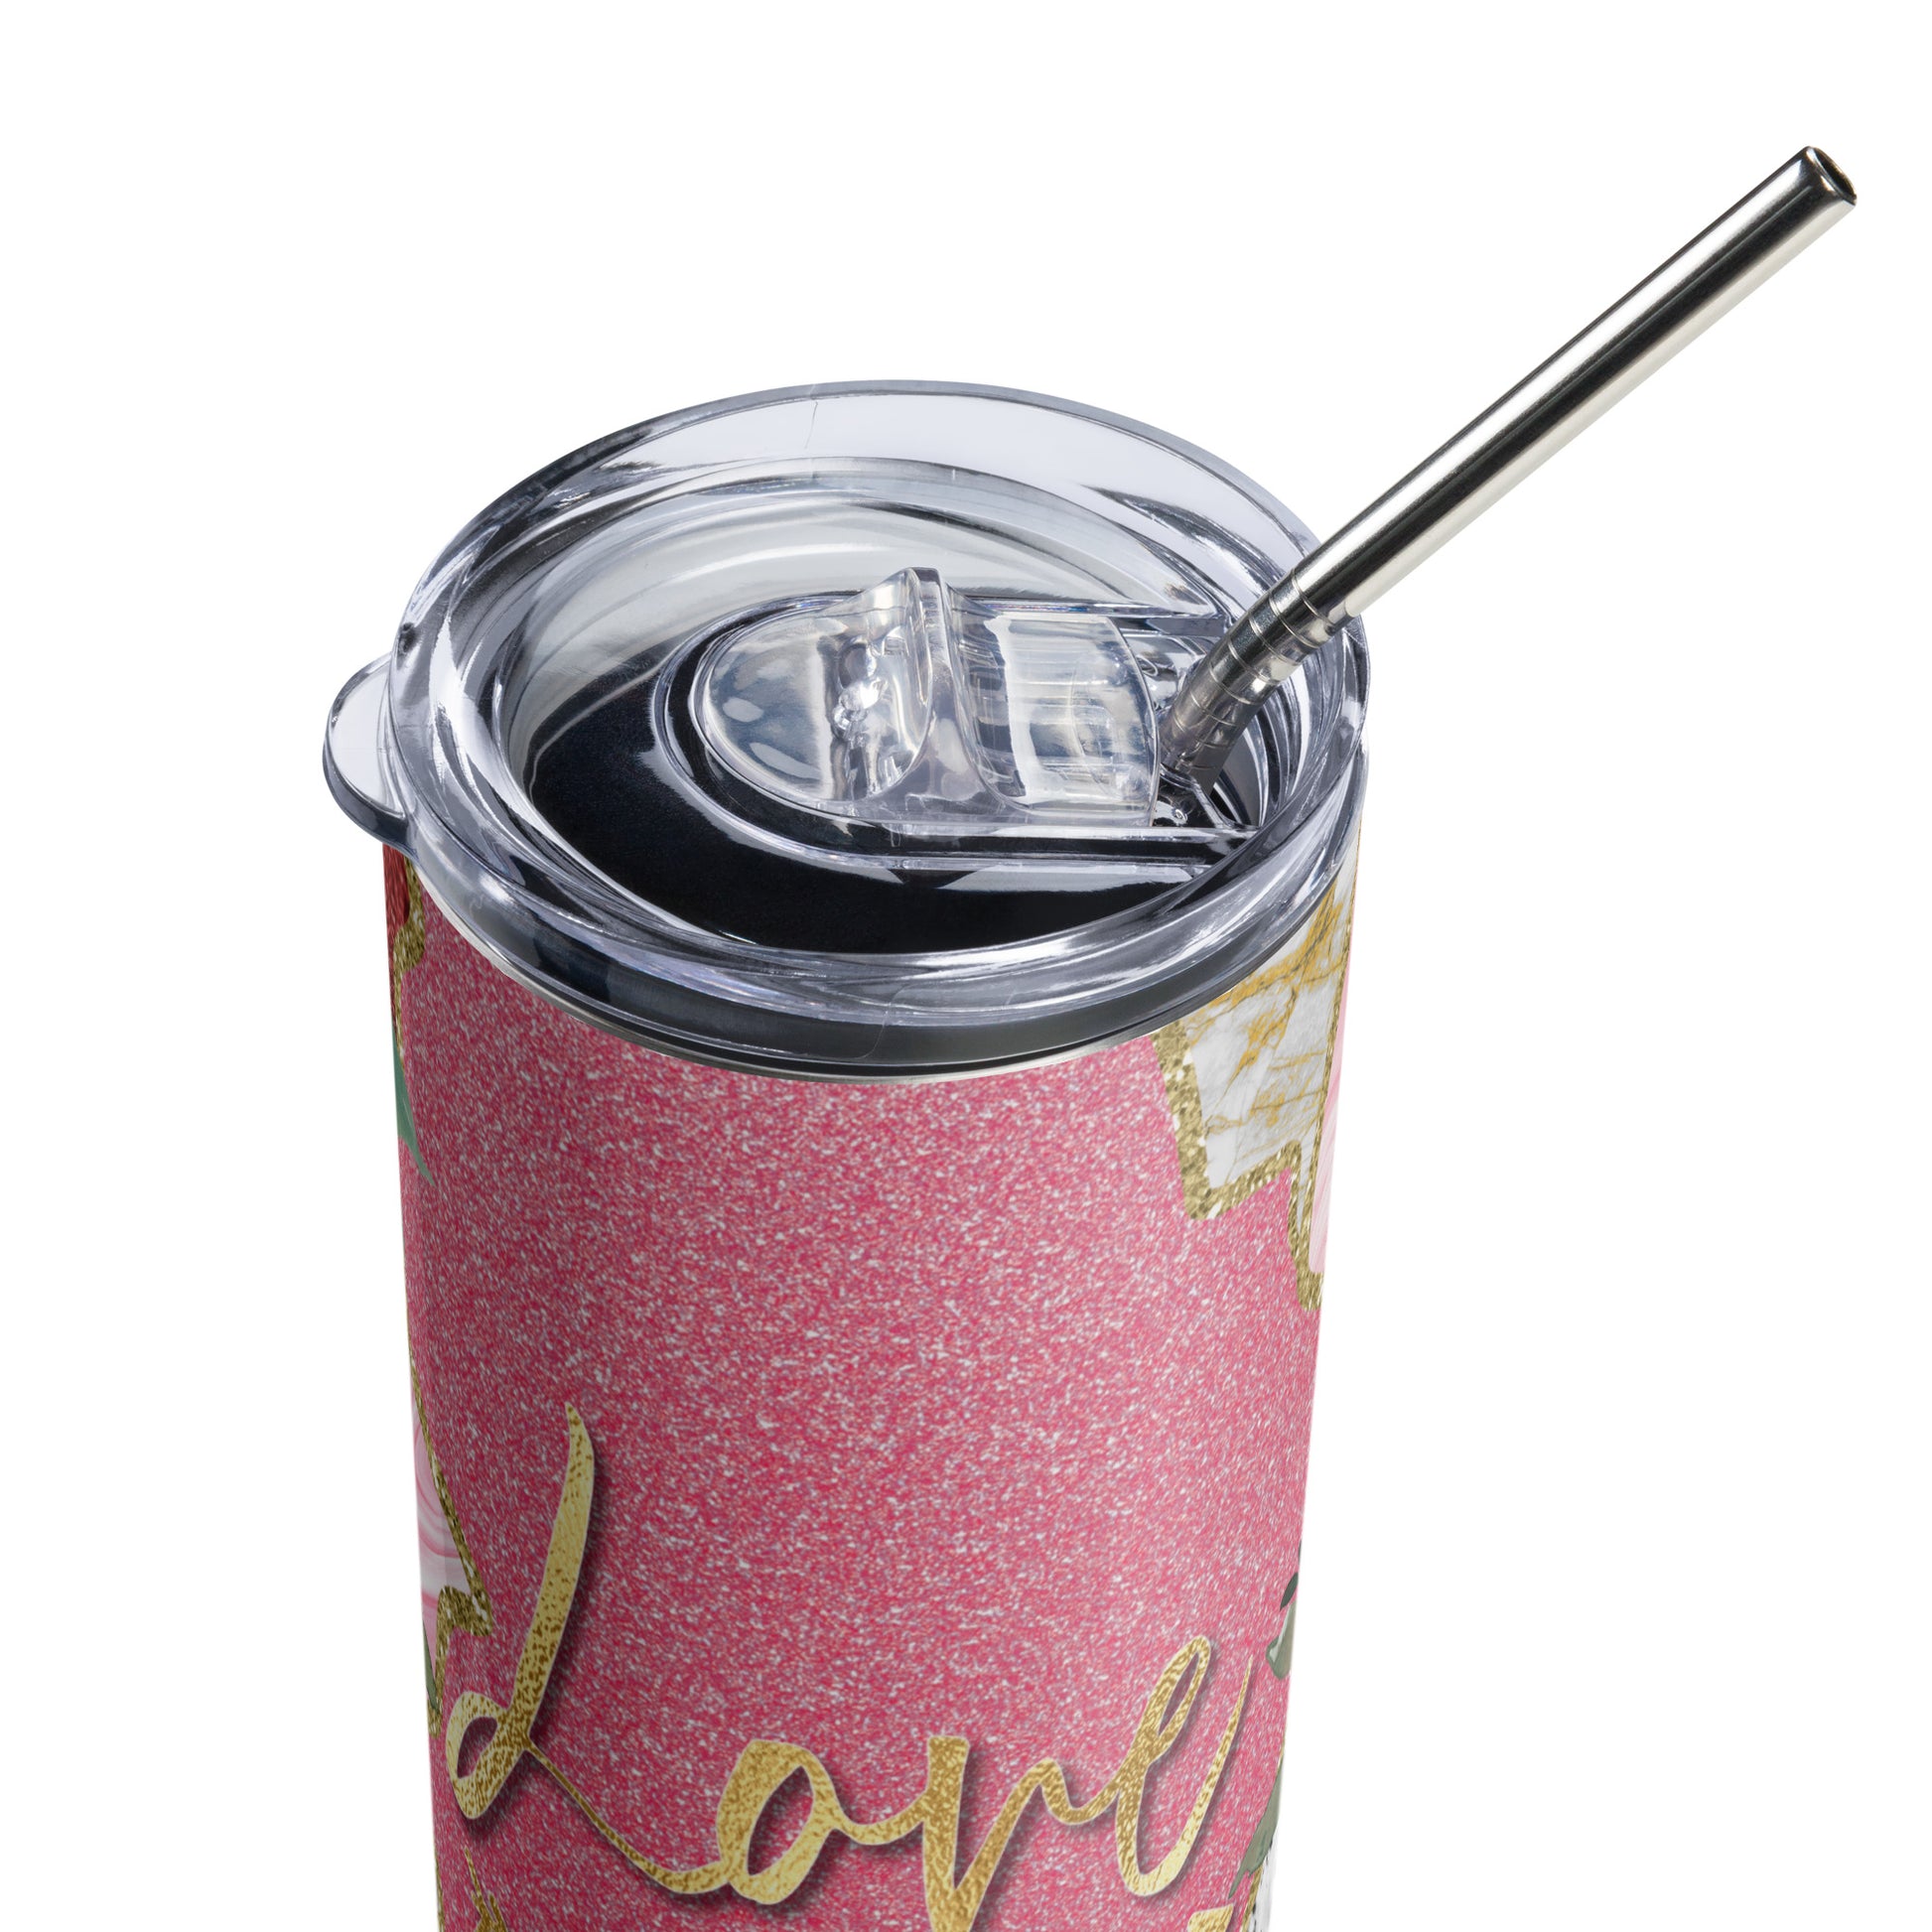 Carry a meaningful reminder of love wherever you go with this 20 oz stainless steel tumbler, adorned with the heartfelt "Love One Another" design, and enjoy the added benefits of a secure lid and straw for a spill-free experience.